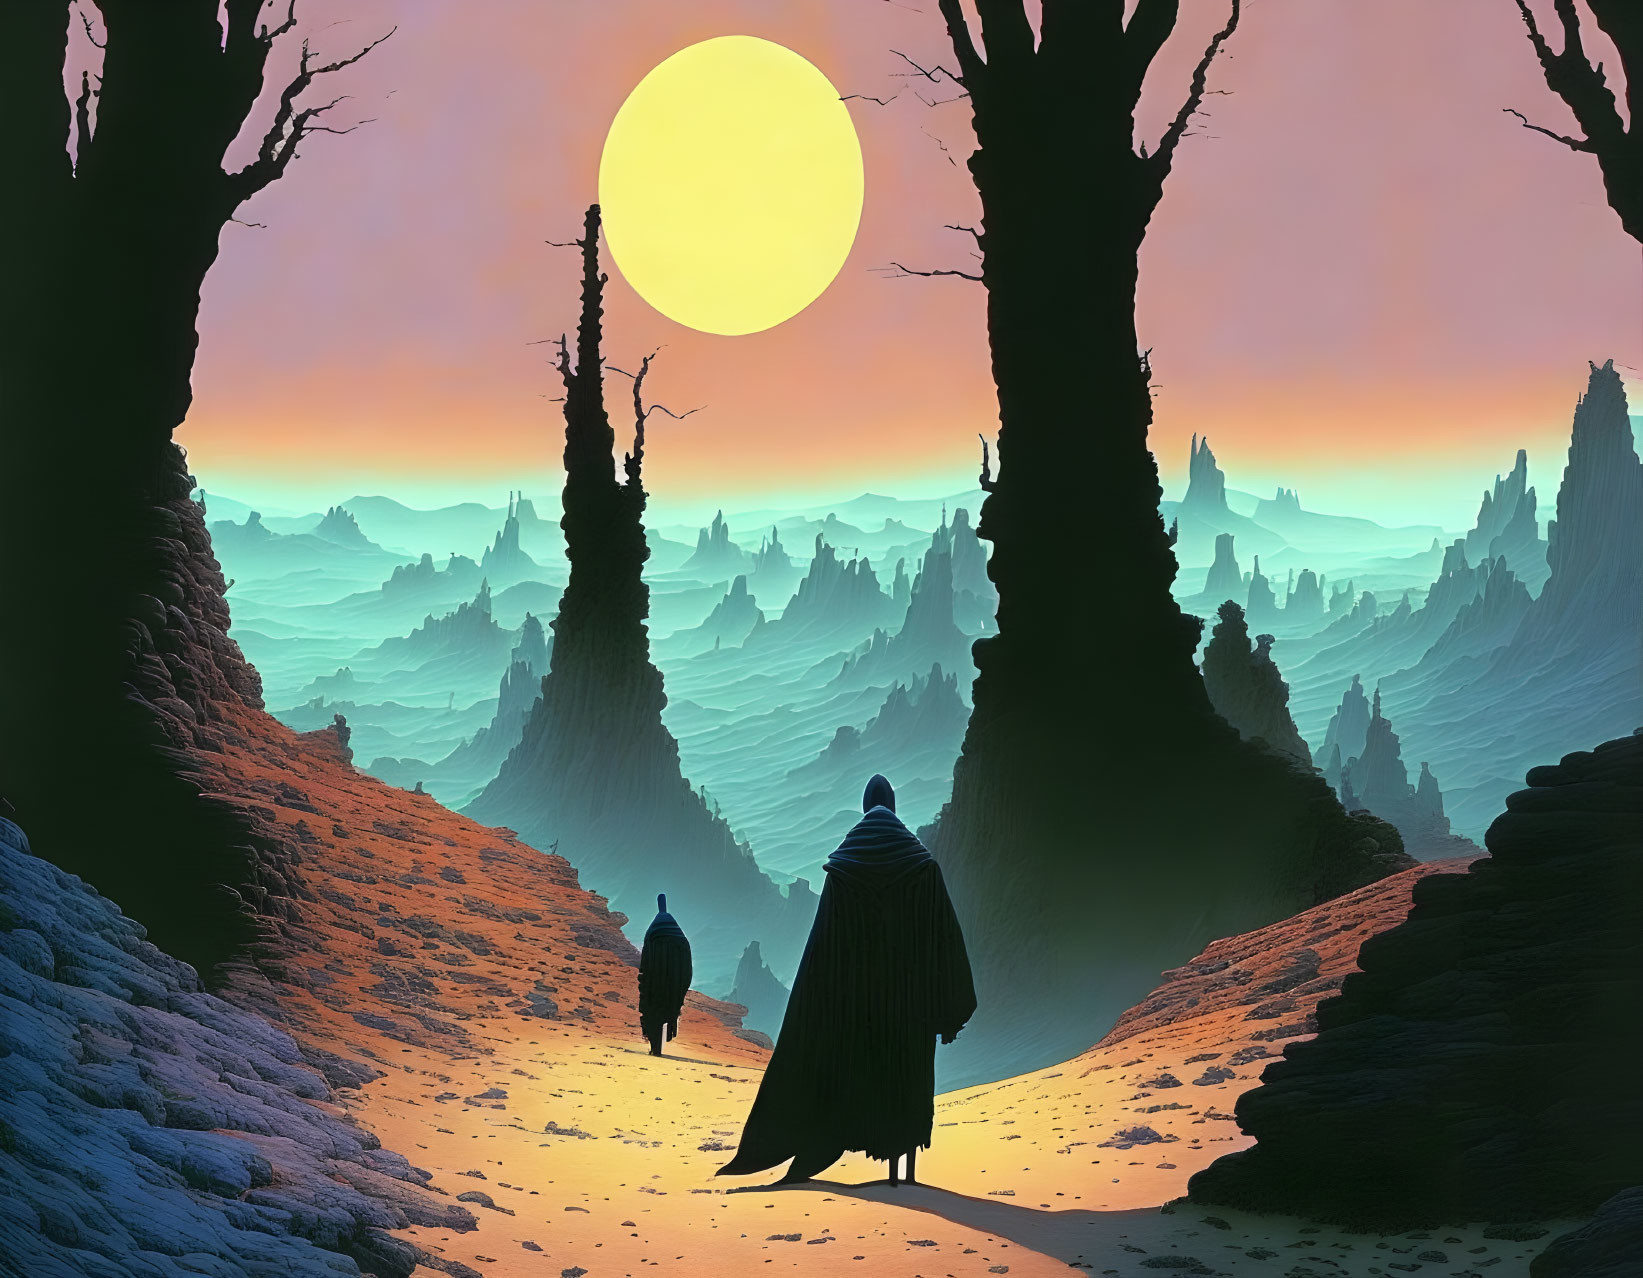 Cloaked Figures in Fantasy Landscape with Large Yellow Sun